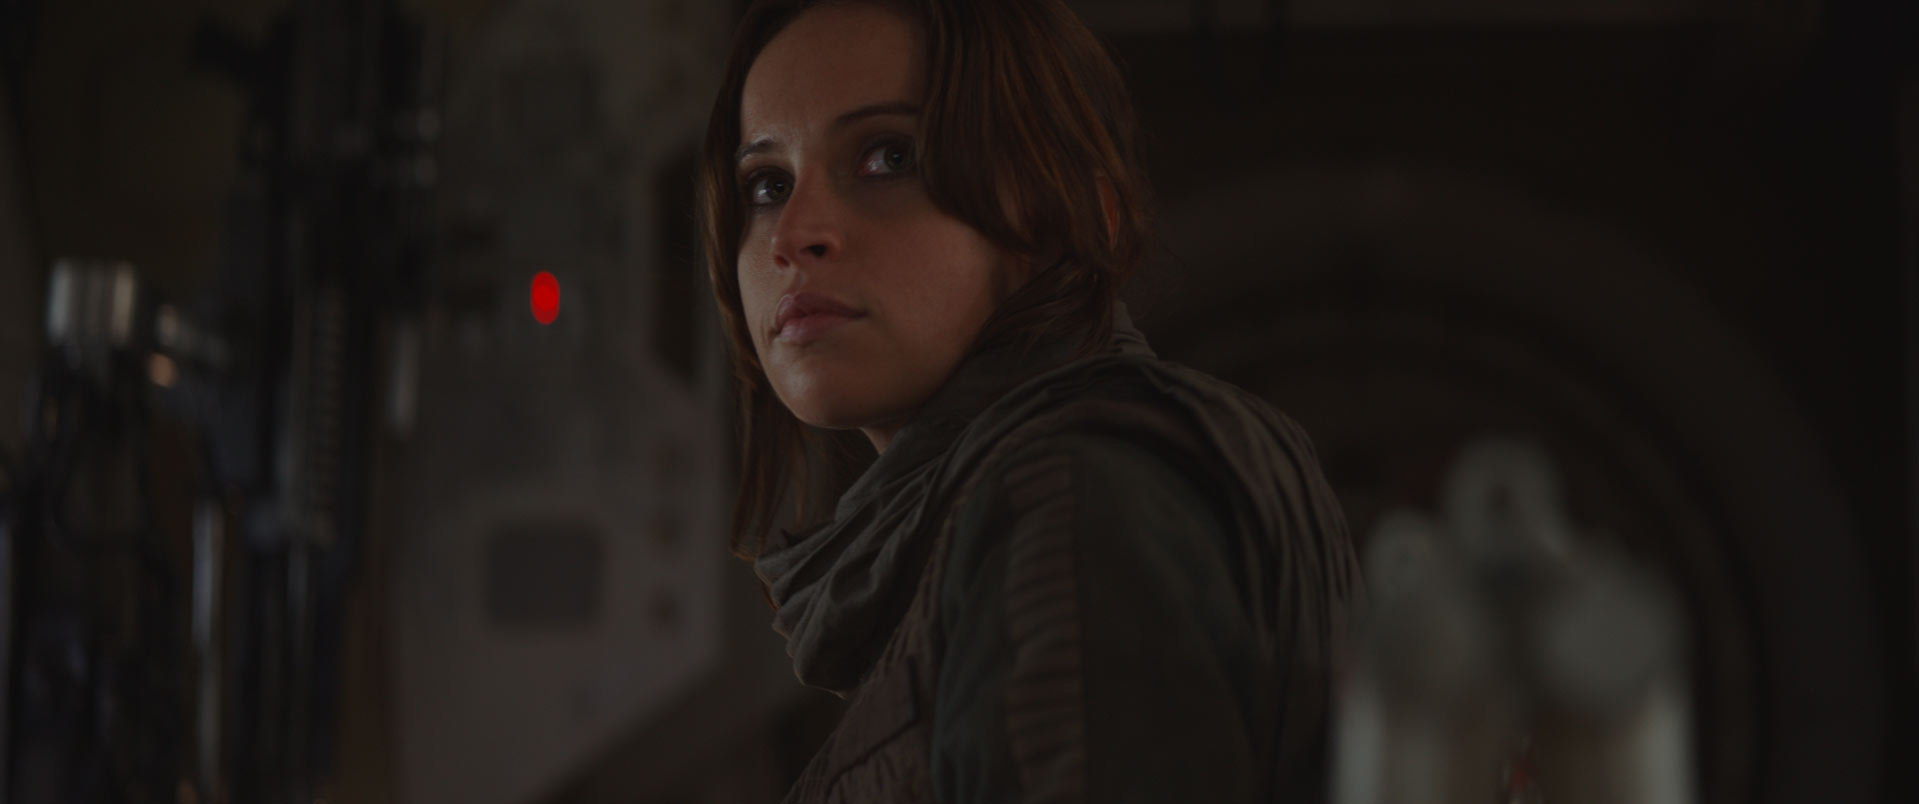 rogue-one-story-gallery-an1-ff-000070 df3c904a